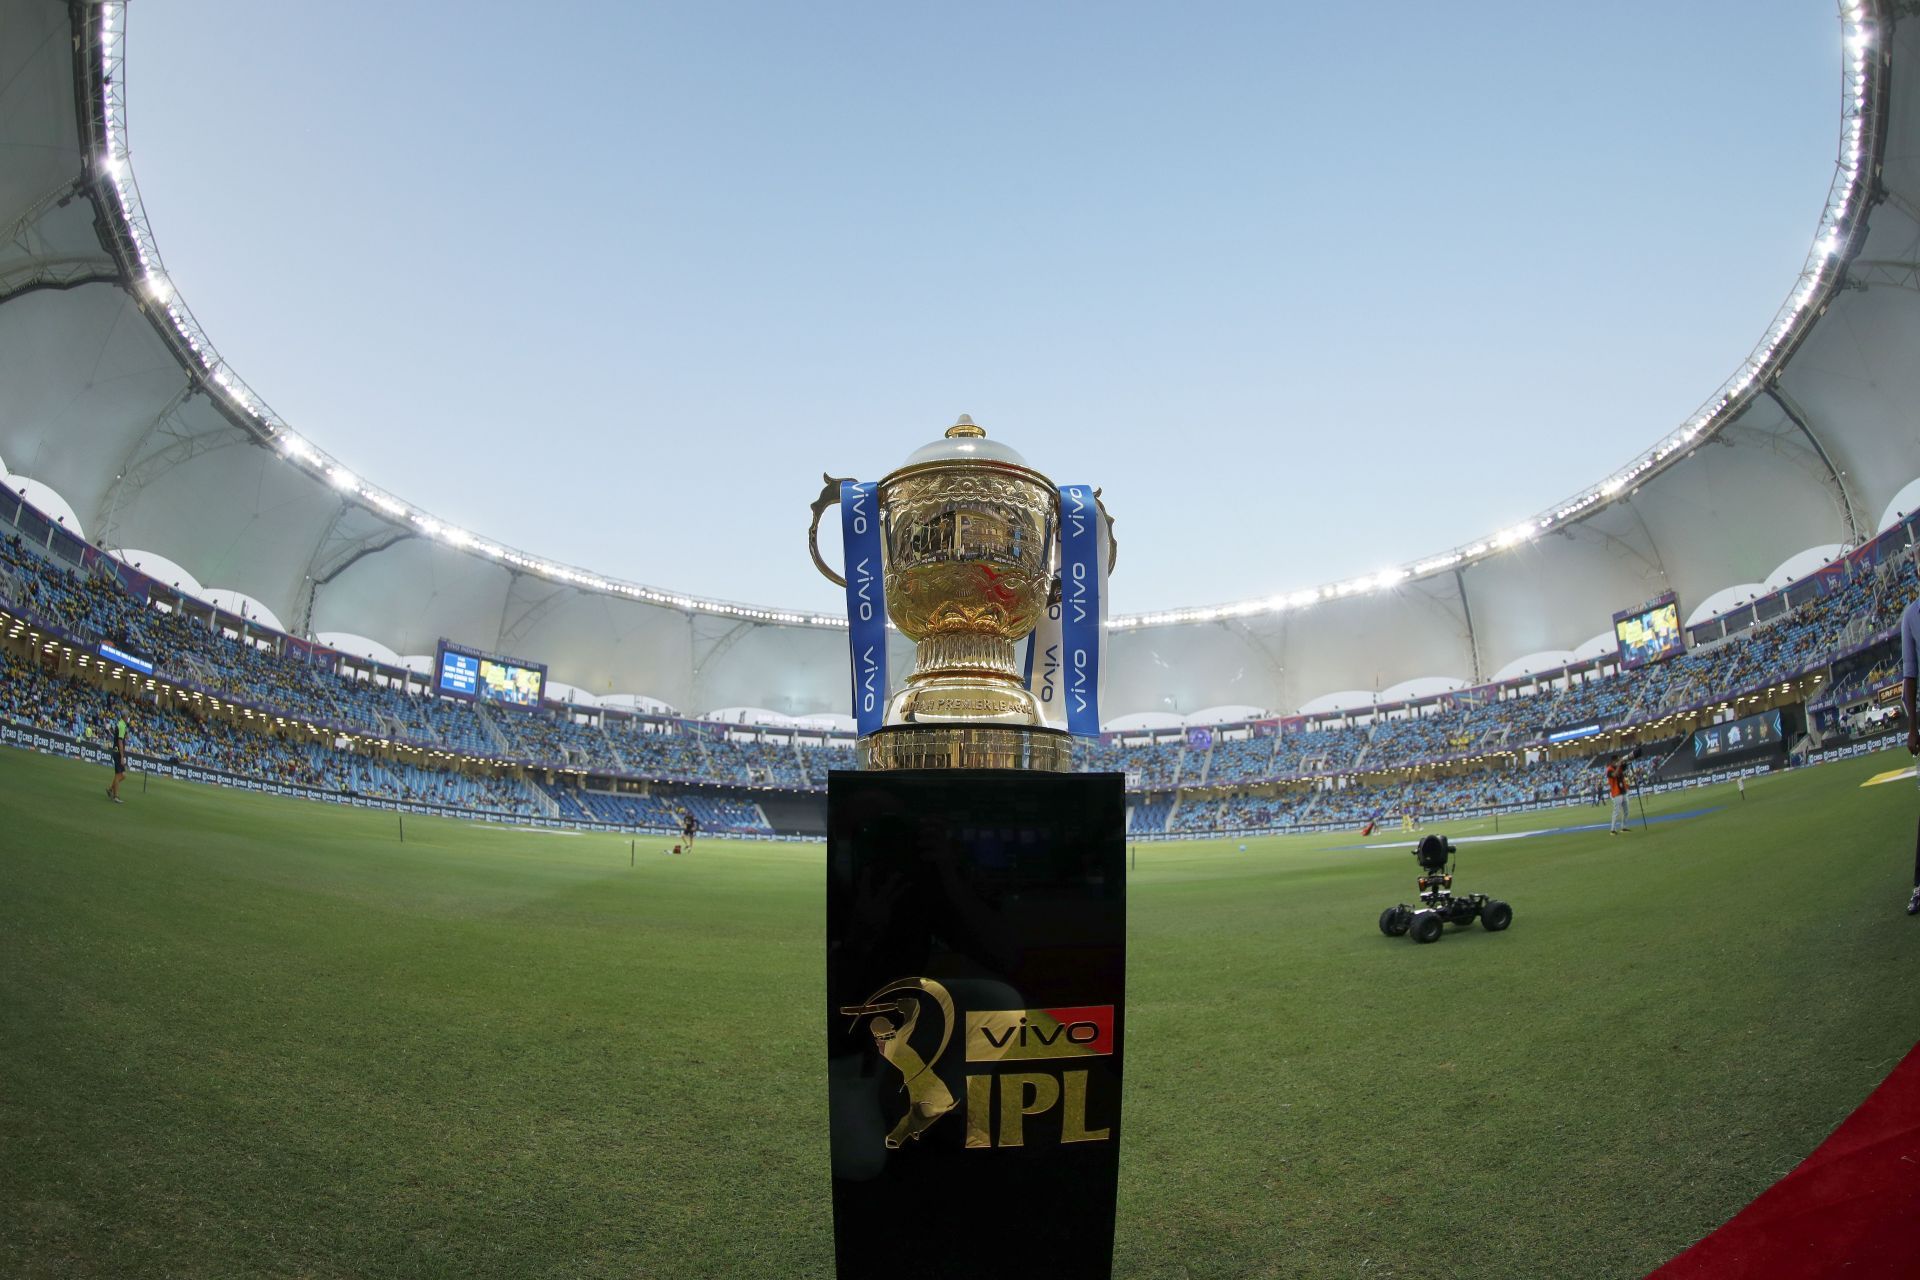 The trophy displayed during the 2021 IPL final.